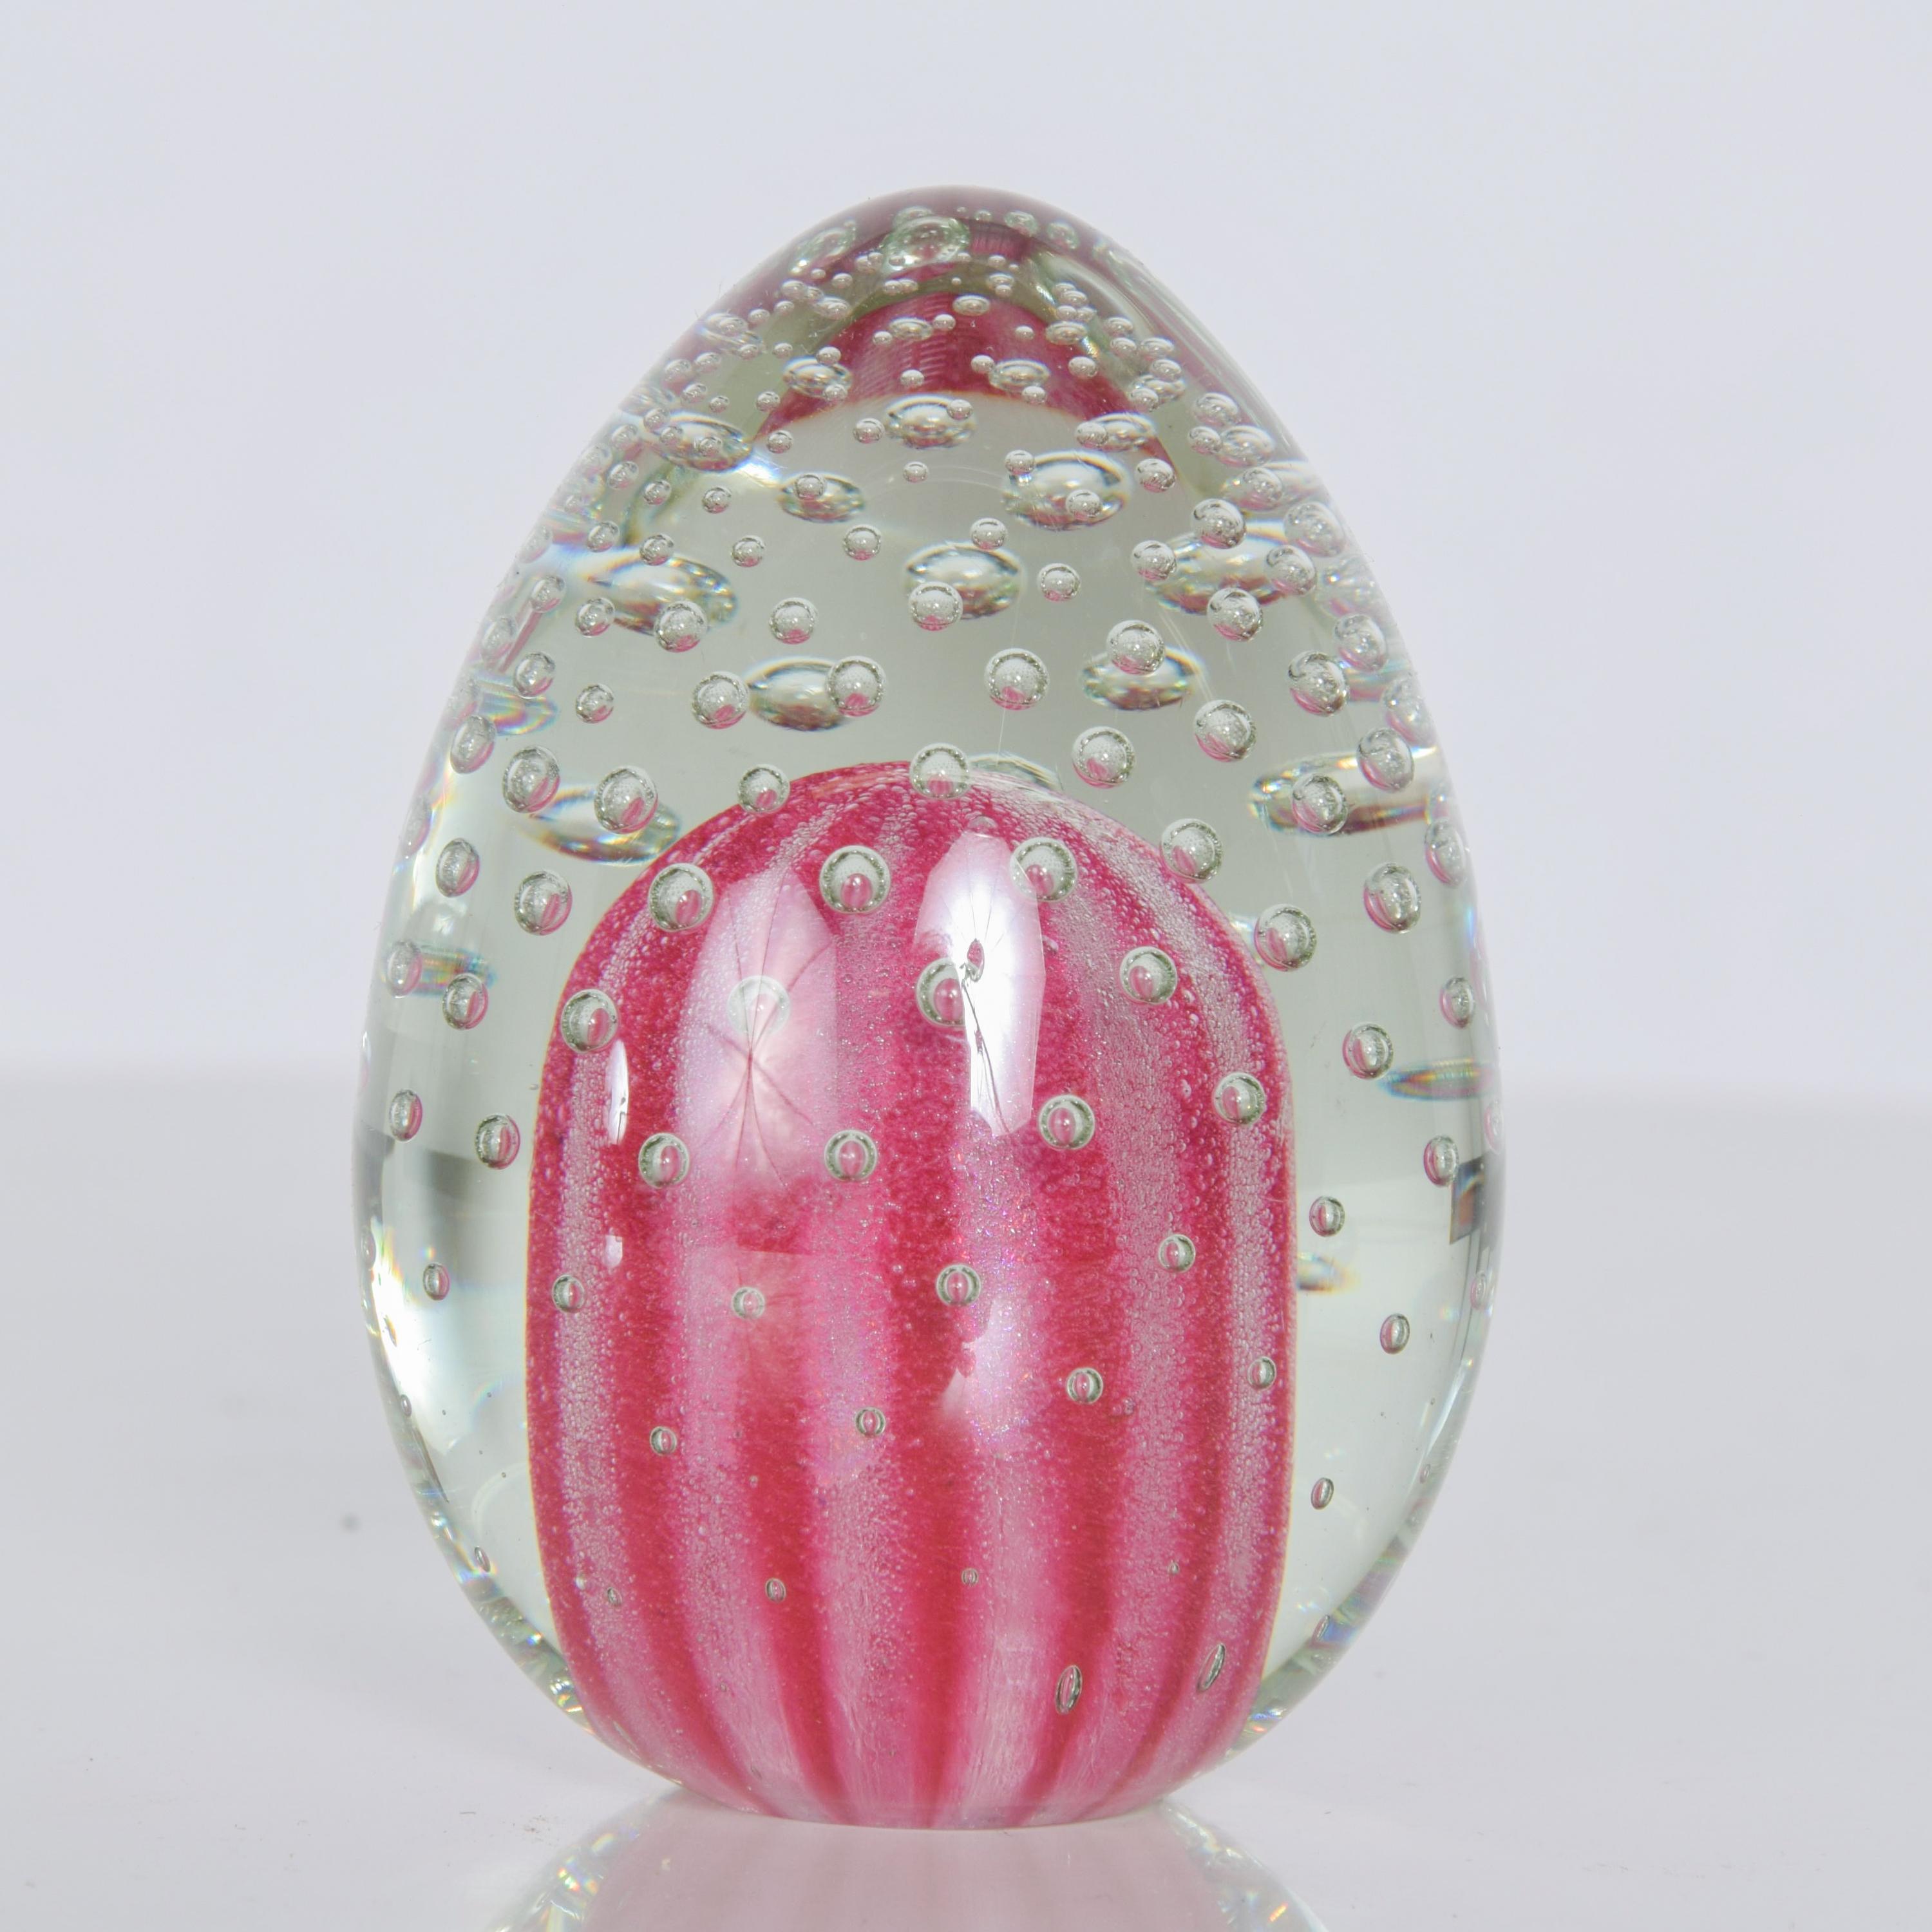 Shocking Pink Paperweight Art Glass Egg Controlled Bubble Tapio Wirkkala Style In Good Condition For Sale In Chula Vista, CA